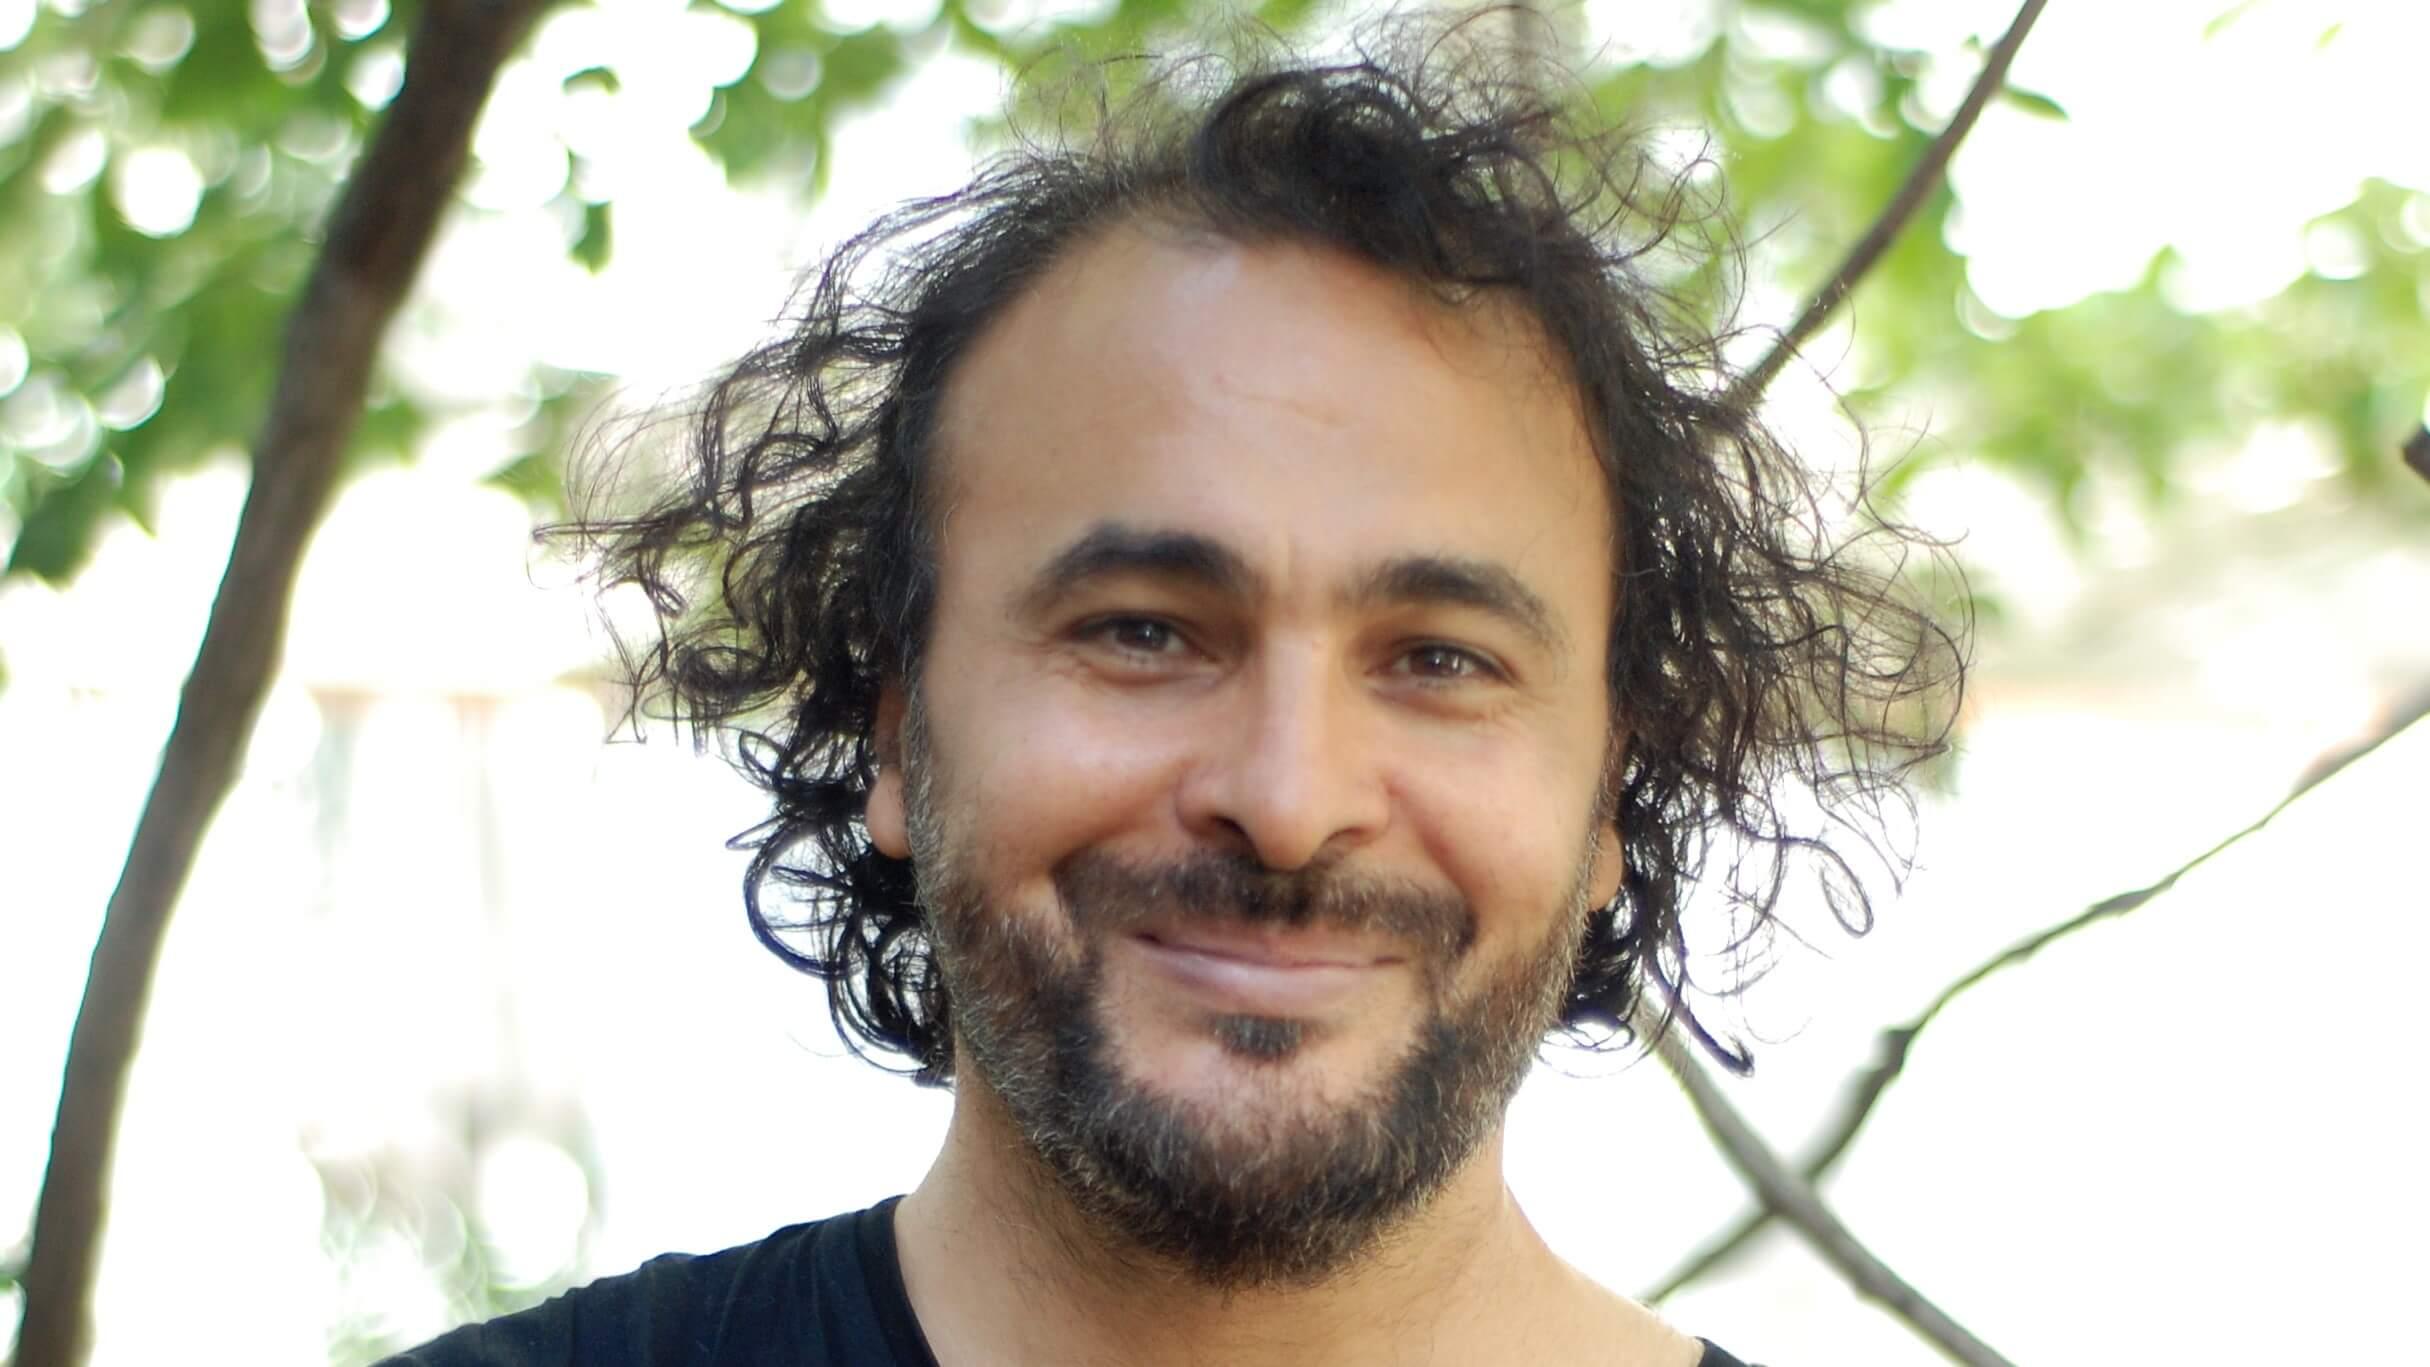 A picture of the jury member Kader Attia